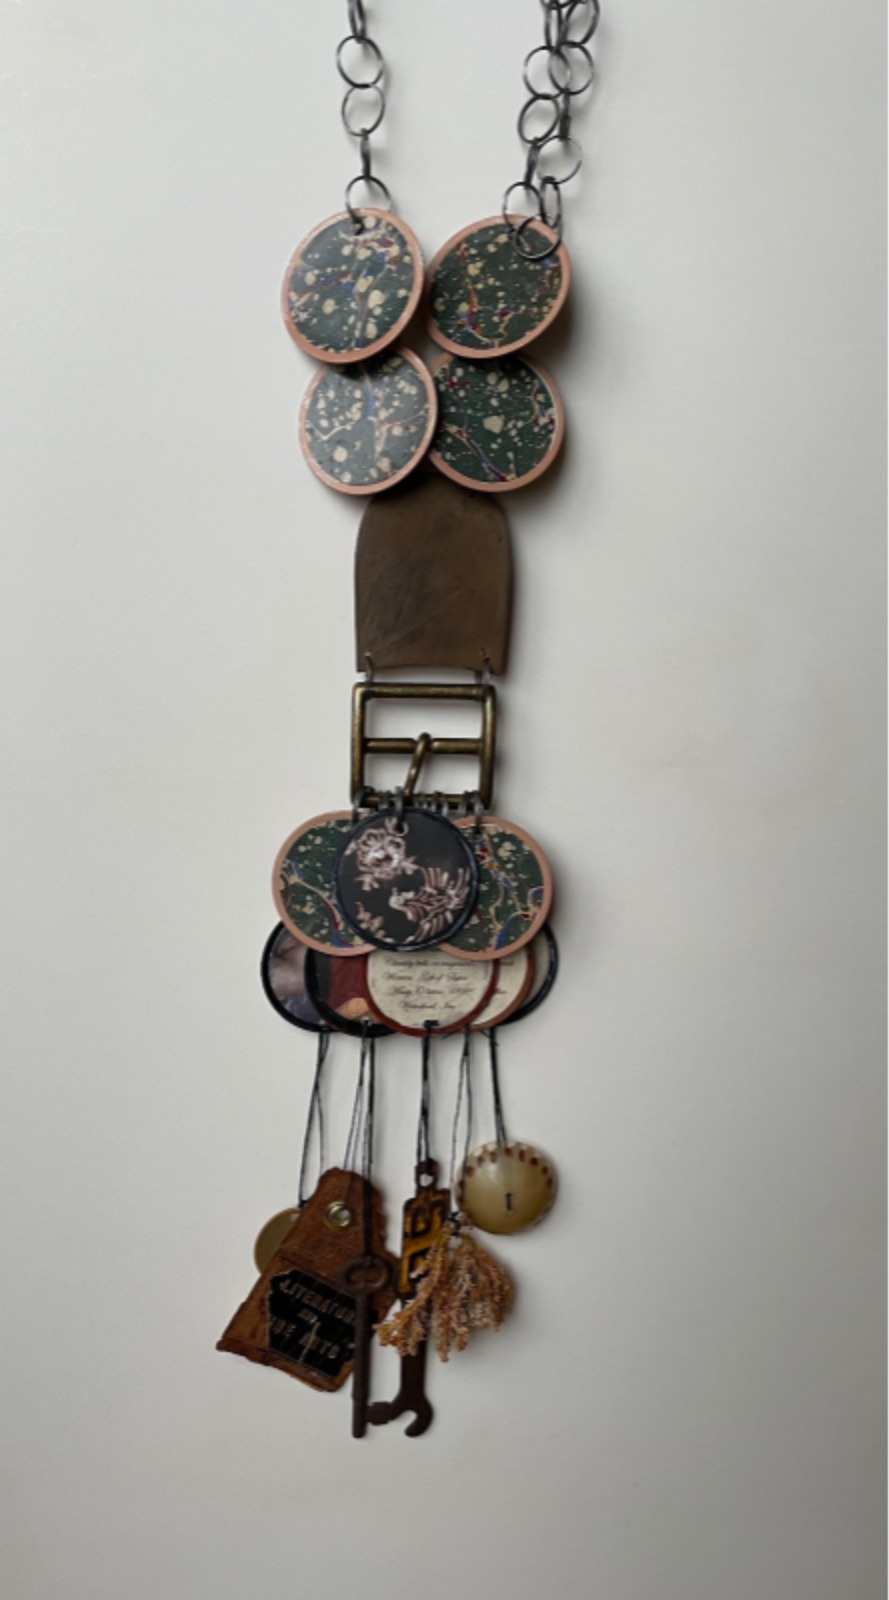 Douglas Dawson Tags, book cover pages, shoe sole, brass belt buckle, other found materials, organic and artificial 2021